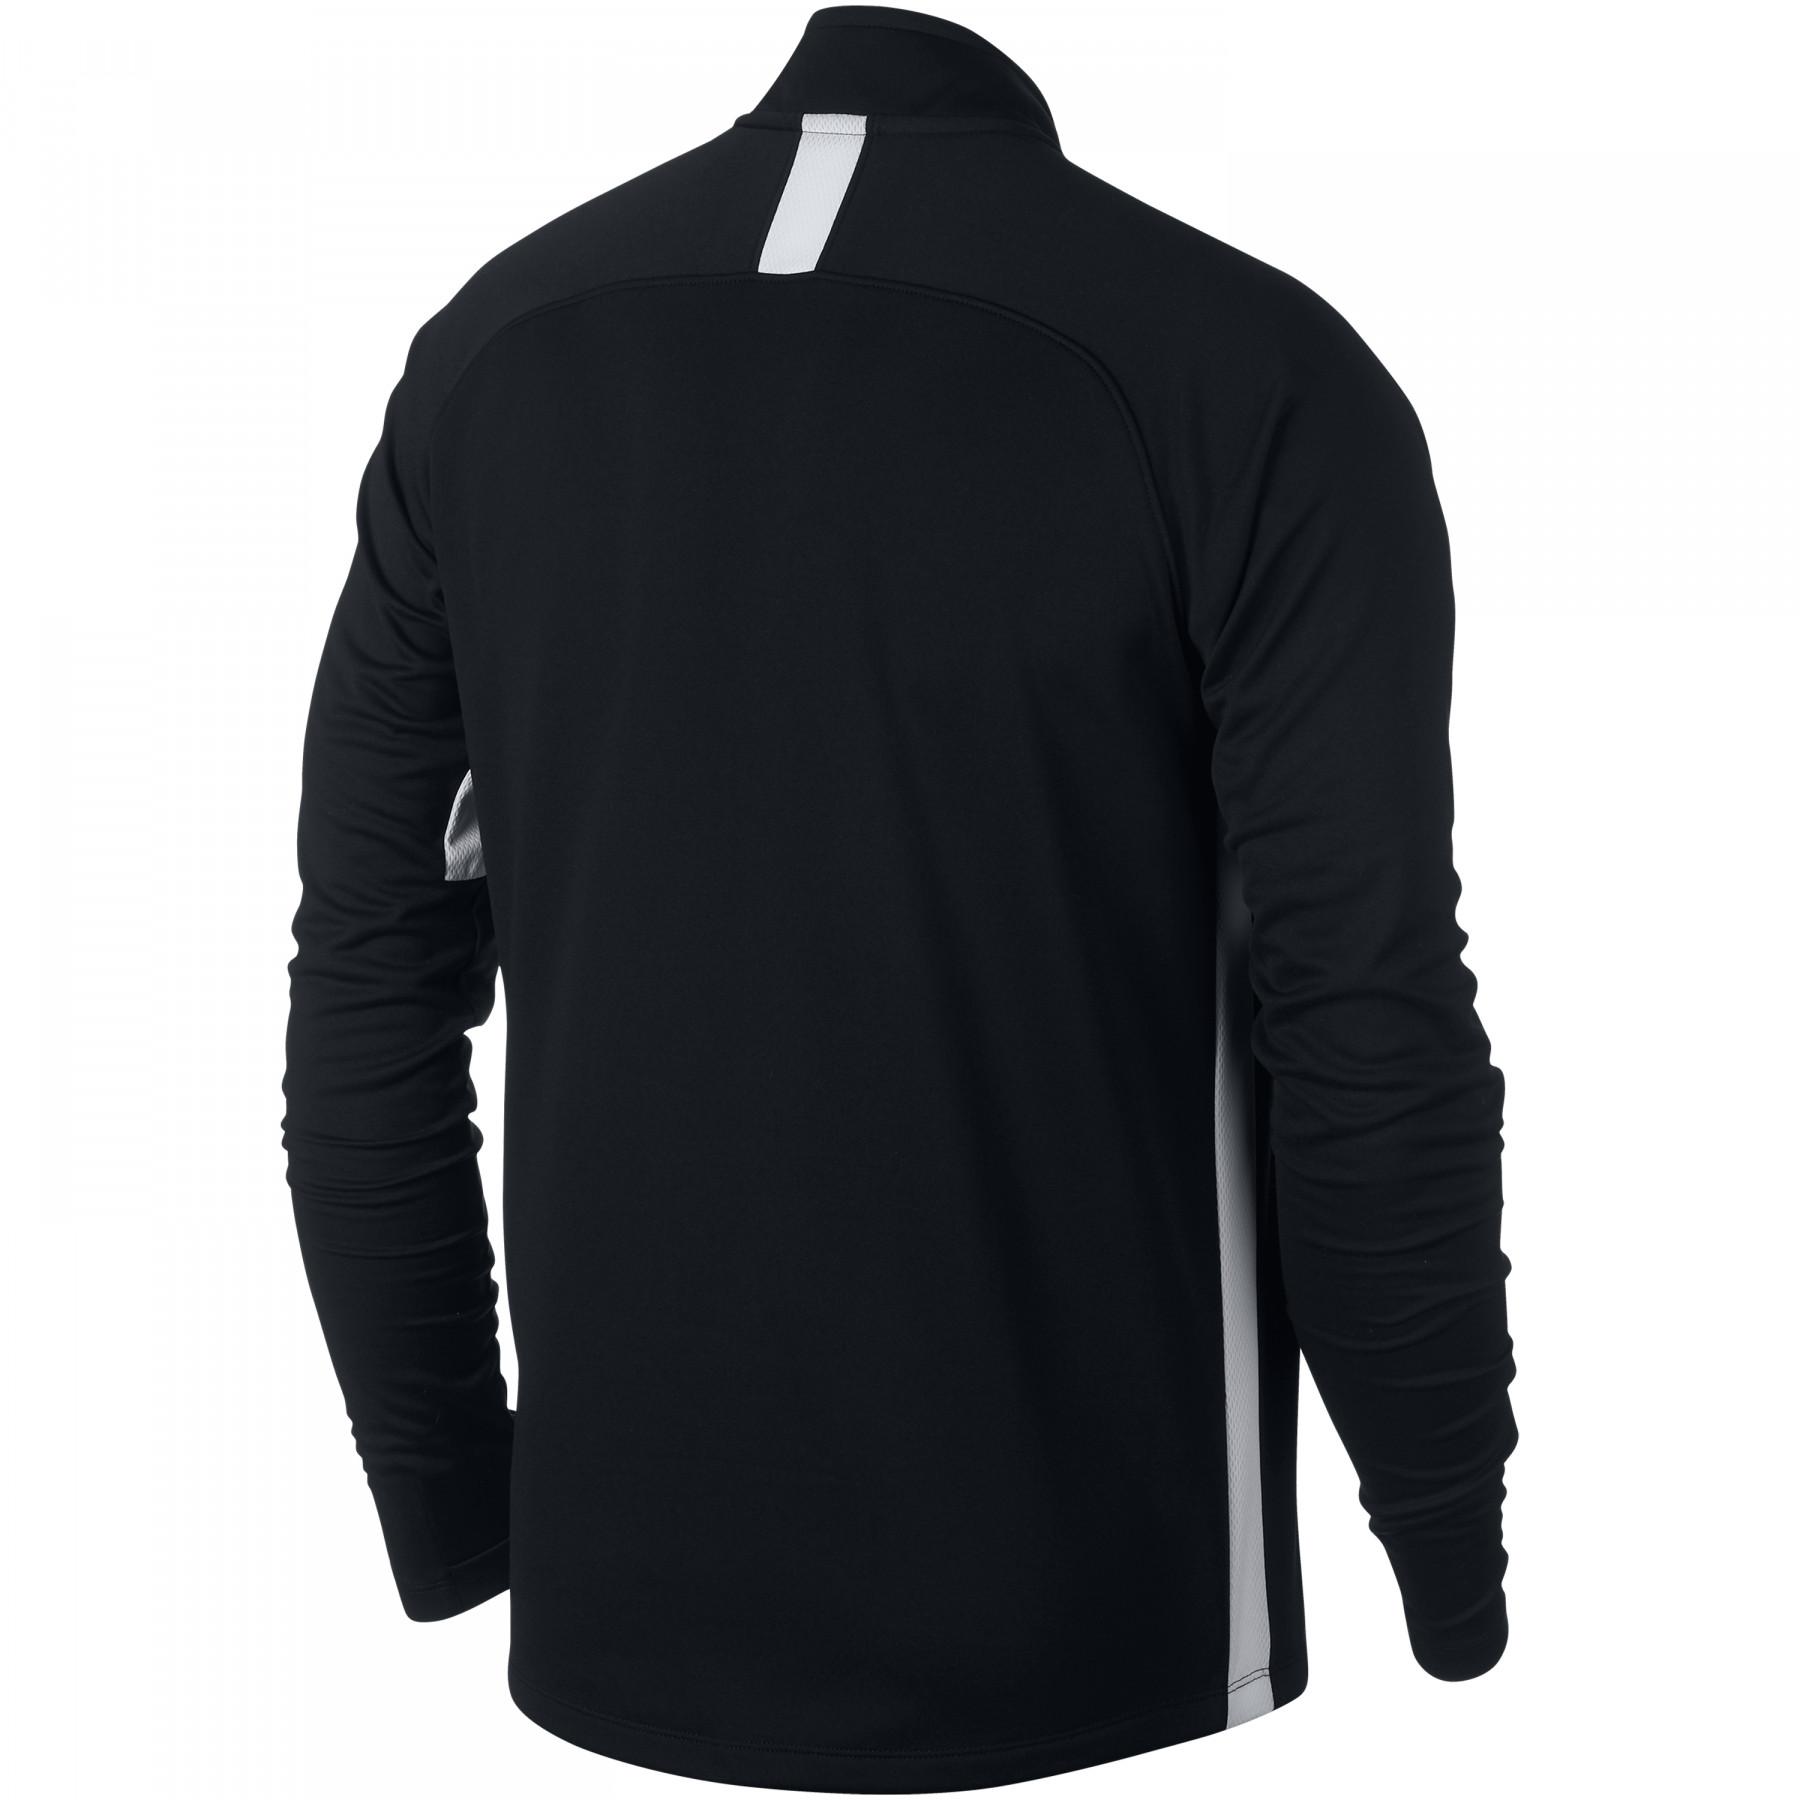 Jersey Nike dry Academy dril Top